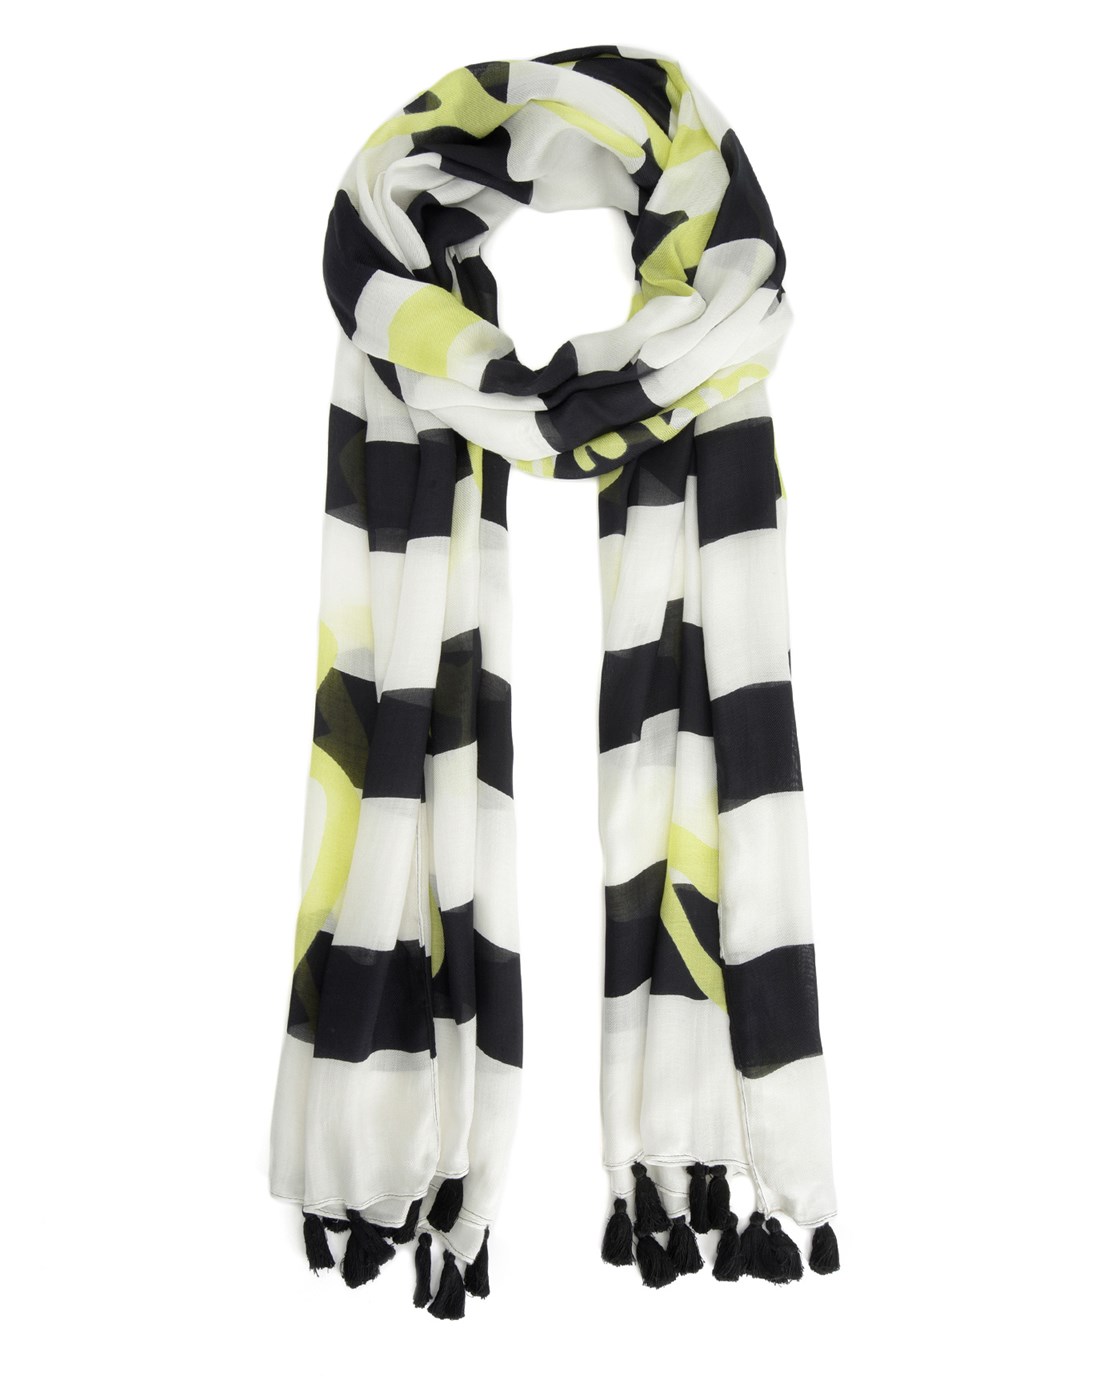 Juicy Couture RUGBY STRIPE SCARF